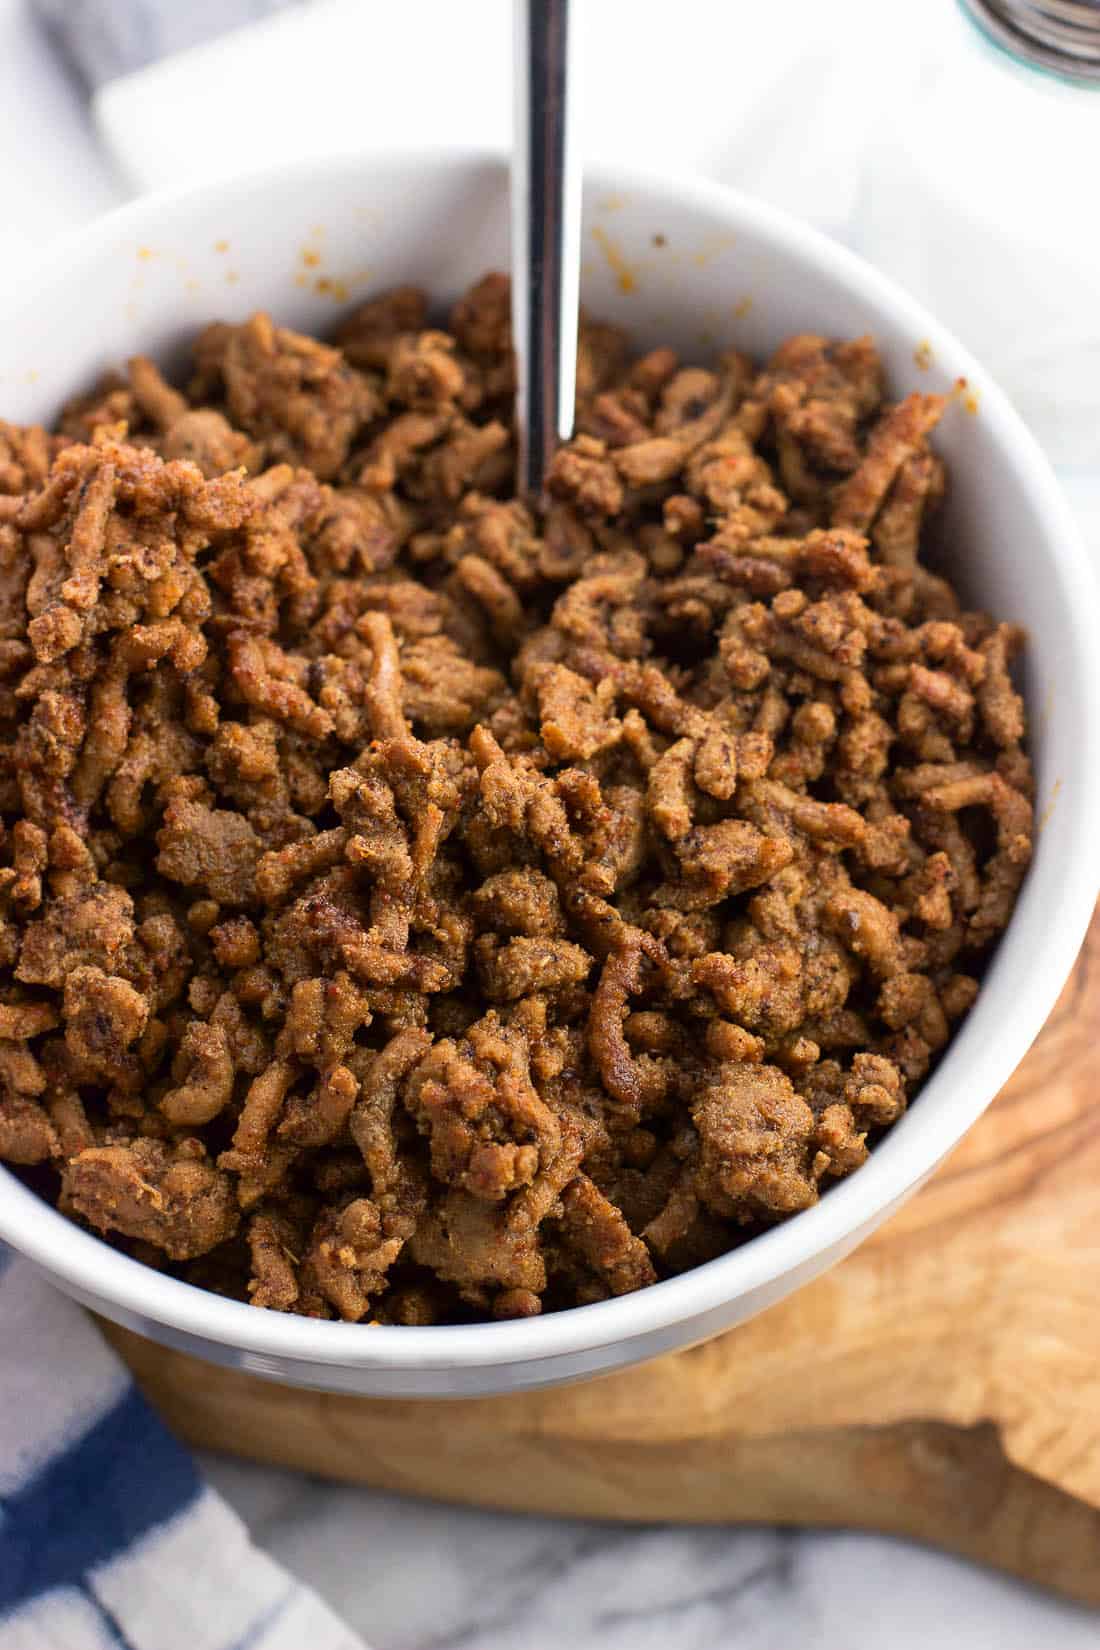 How to Make Taco Meat (Beef or Turkey)